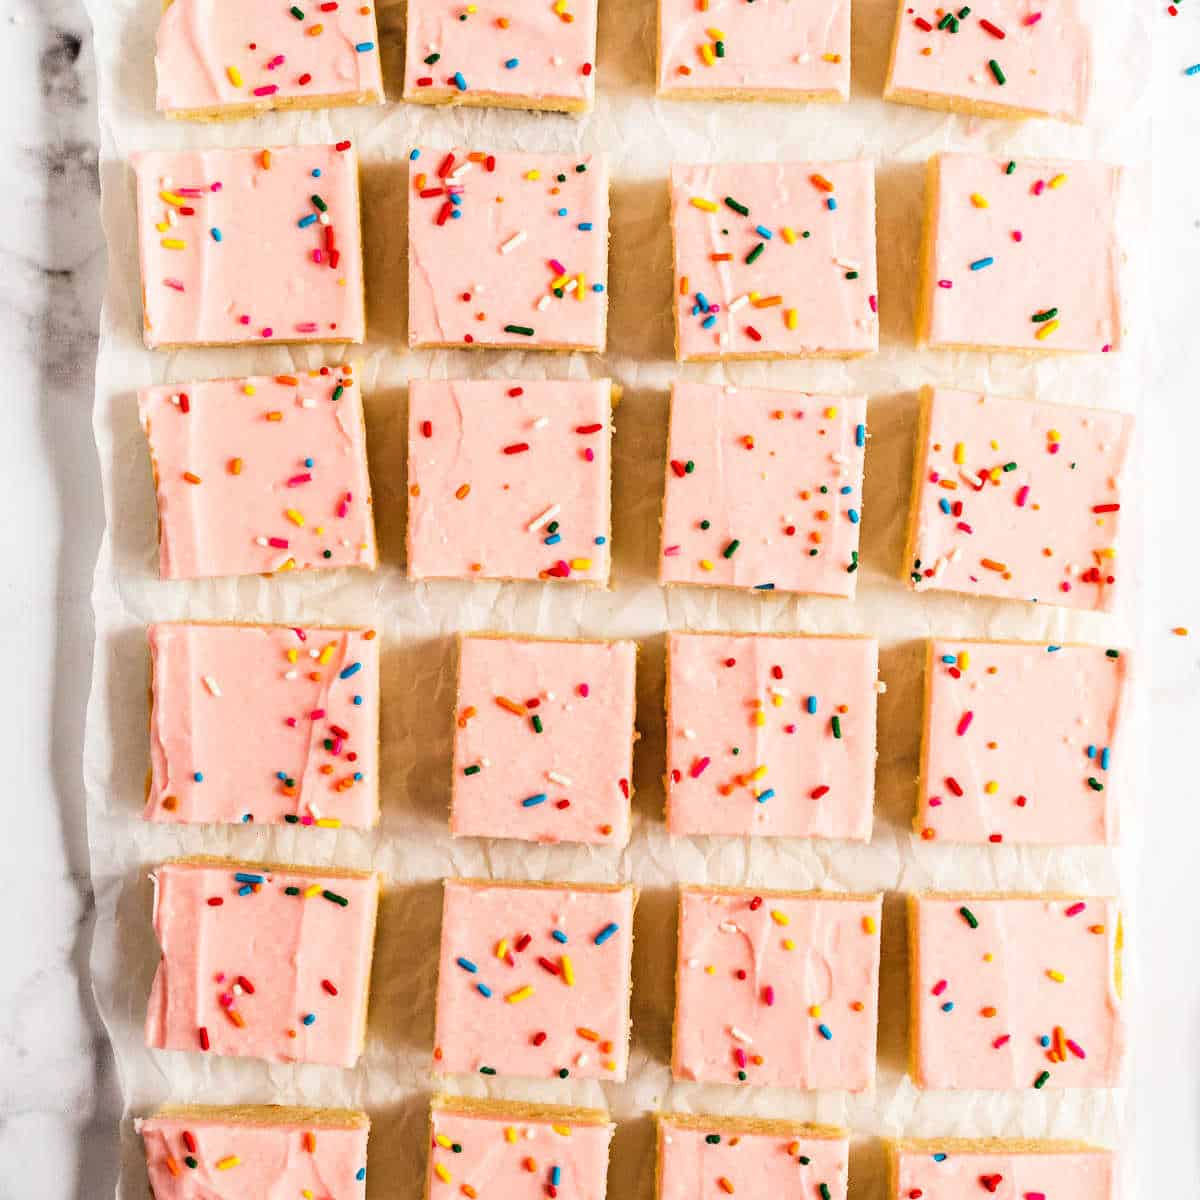 parchment paper with cookie bars on it